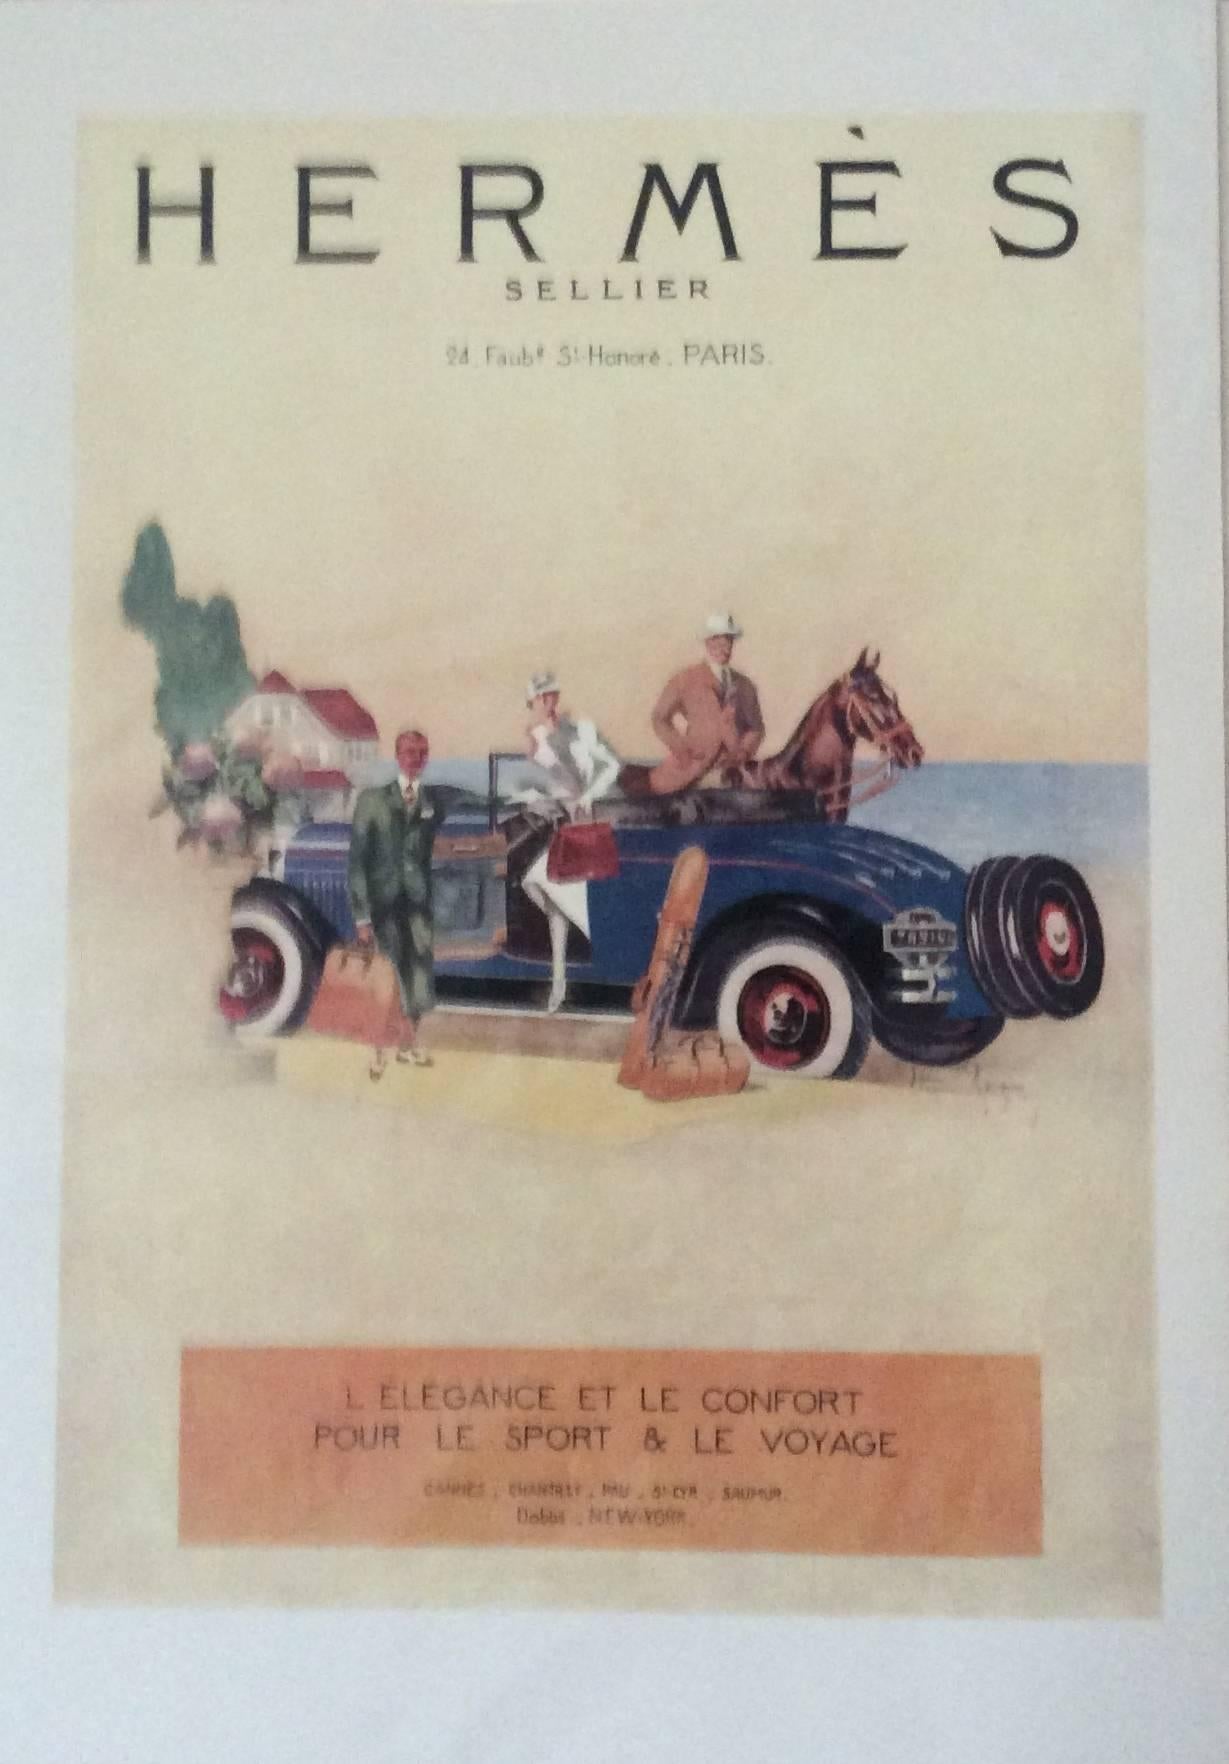 This is a print of an advertising poster of Hermes from the 1930's. The print is an image of a group of well dressed people, a vintage automobile, and a horse. The backdrop is a waterfront.

These particular ads were used as storefront displays in